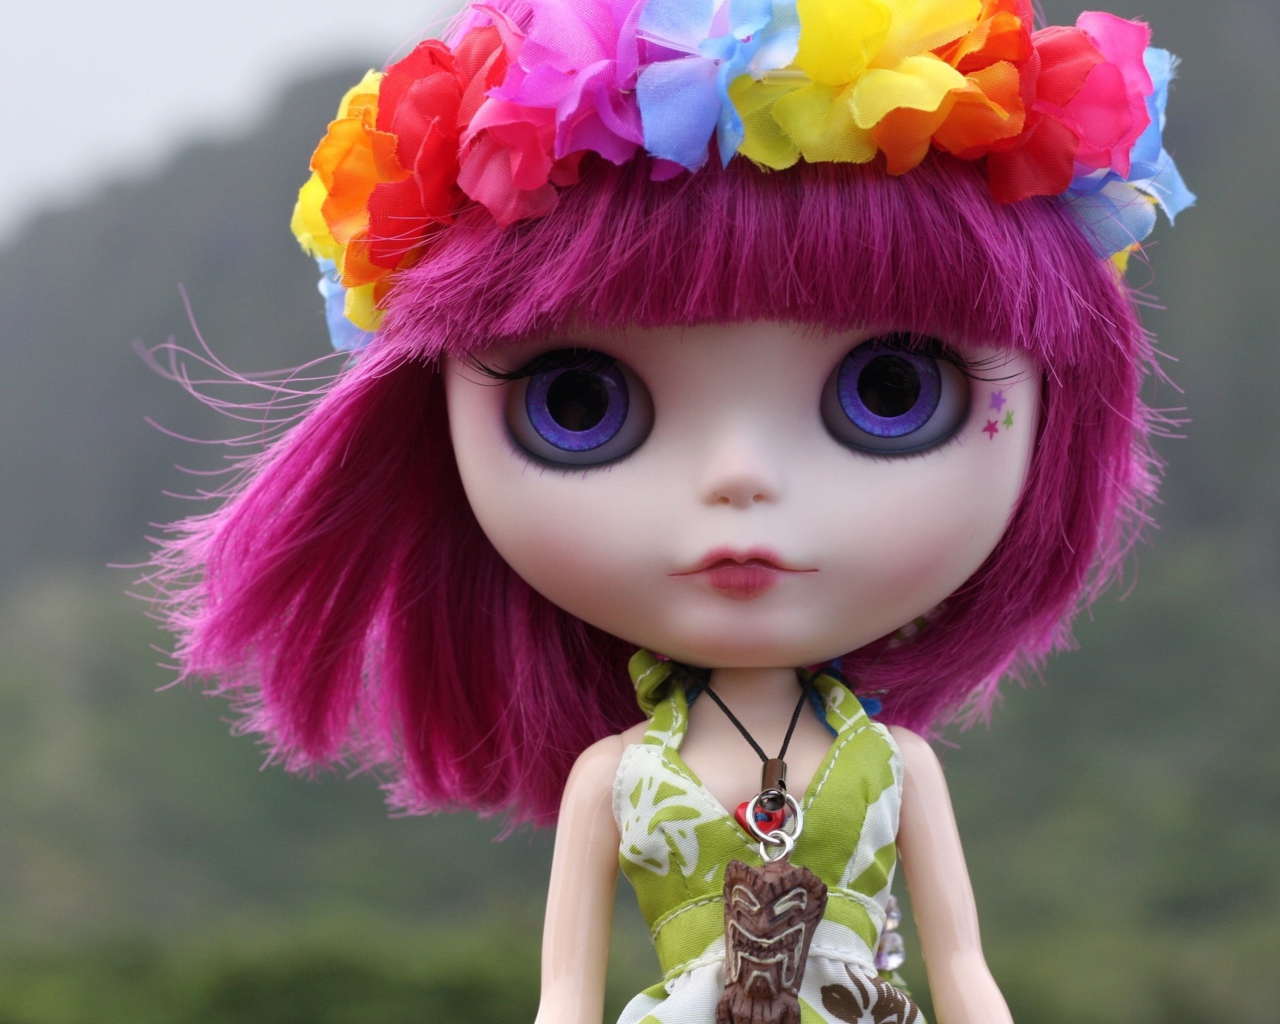 Doll With Pink Hair And Blue Eyes wallpaper 1280x1024